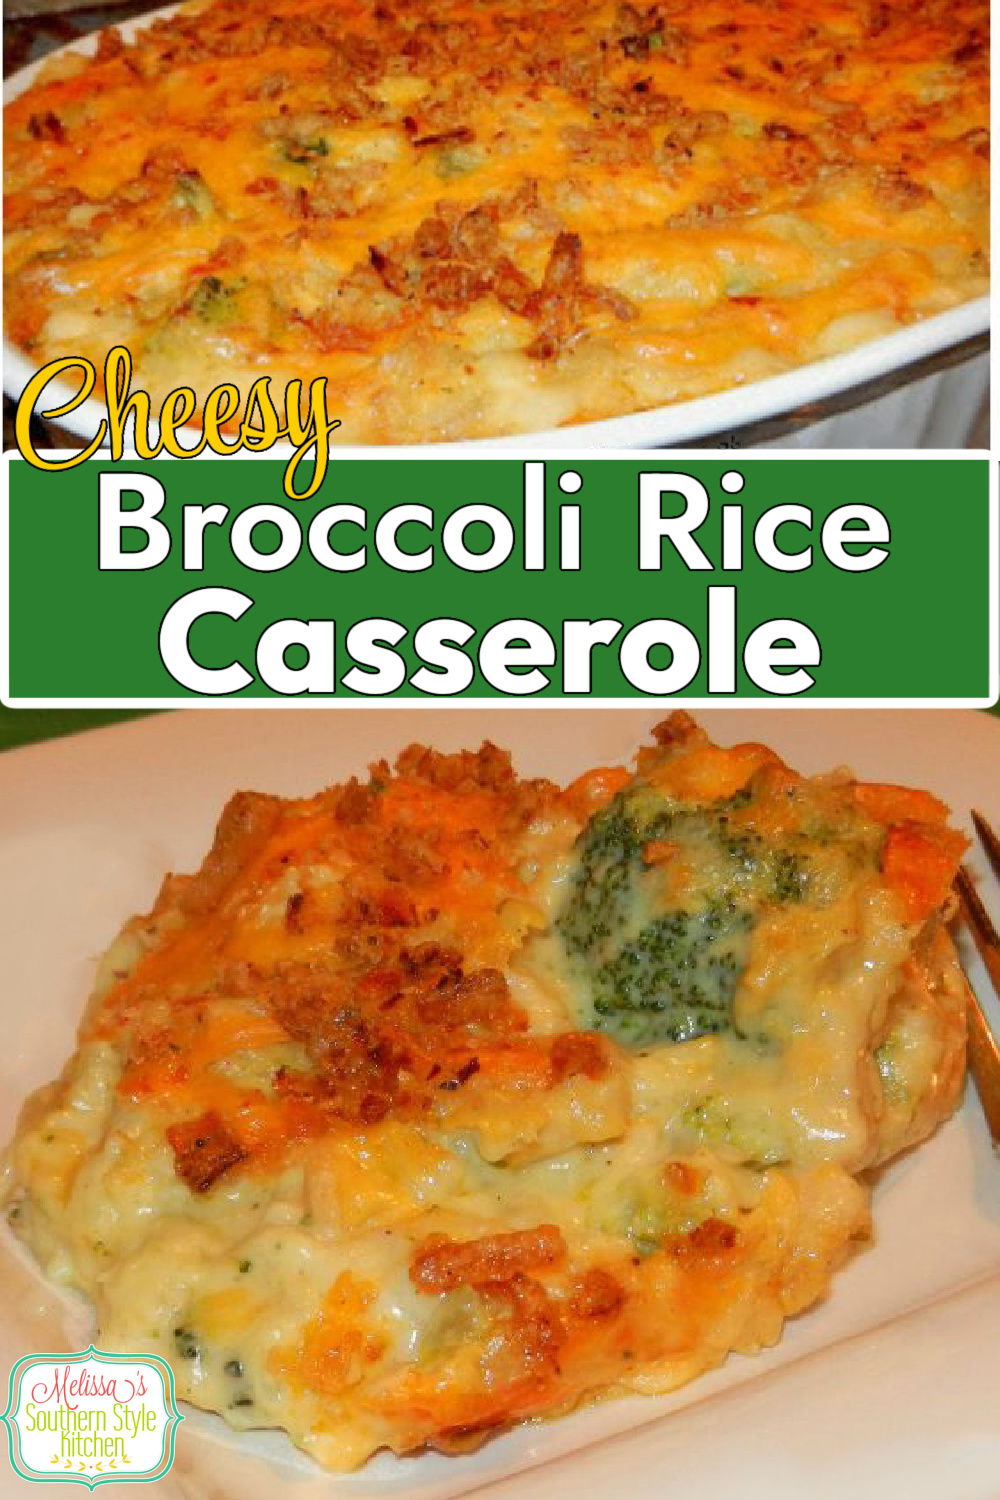 Add this Cheesy Broccoli Rice Casserole to your side dish menu ASAP #broccolicheese #broccolicheese #broccolicasserole #cheesybroccoliricecasserole #casserolerecipes #dinnerideas #cheddarcheese #vegetaian #broccoli #holidaysidedishes #southernfood #southerncasseroles #southernrecipes via @melissasssk